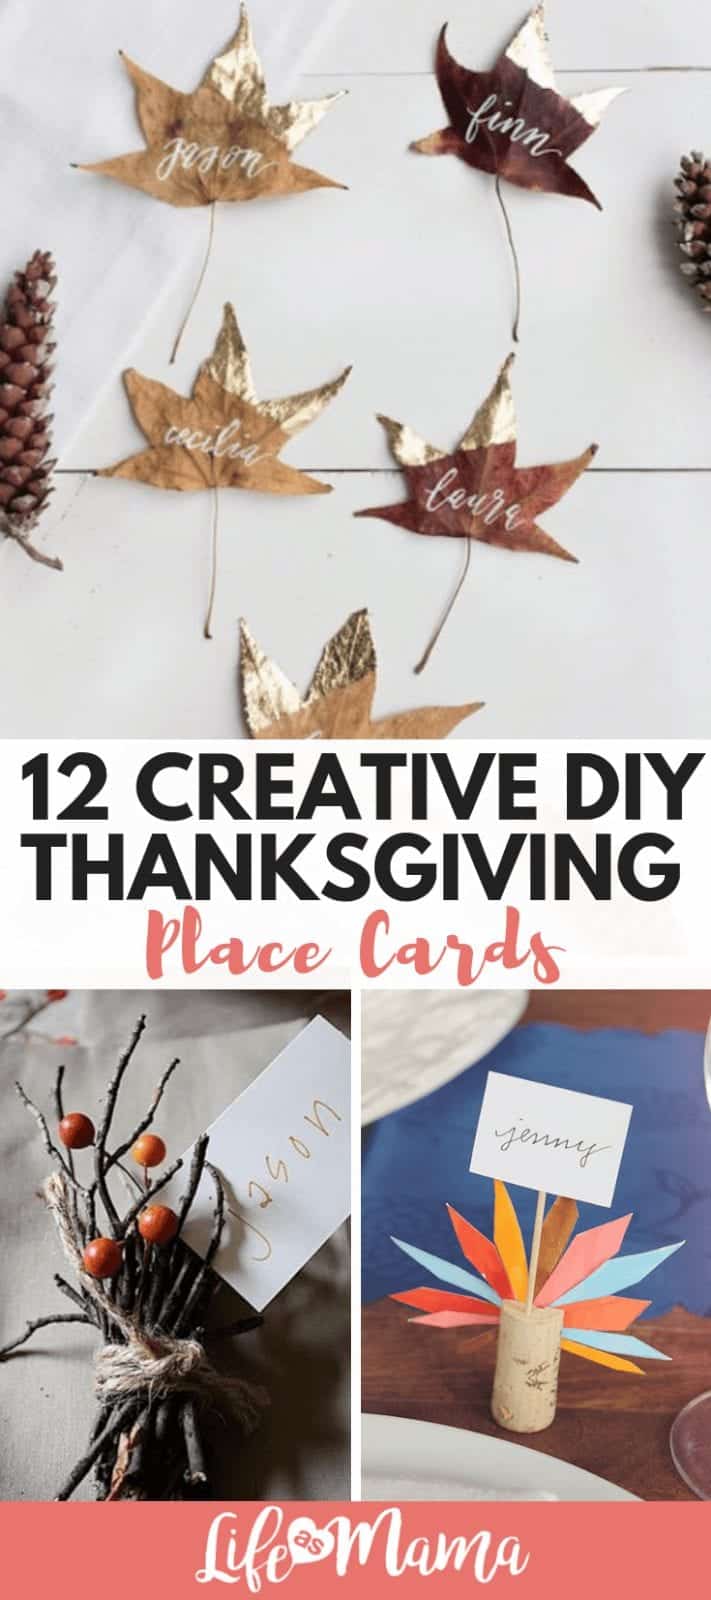 12 Creative DIY Thanksgiving Place Cards